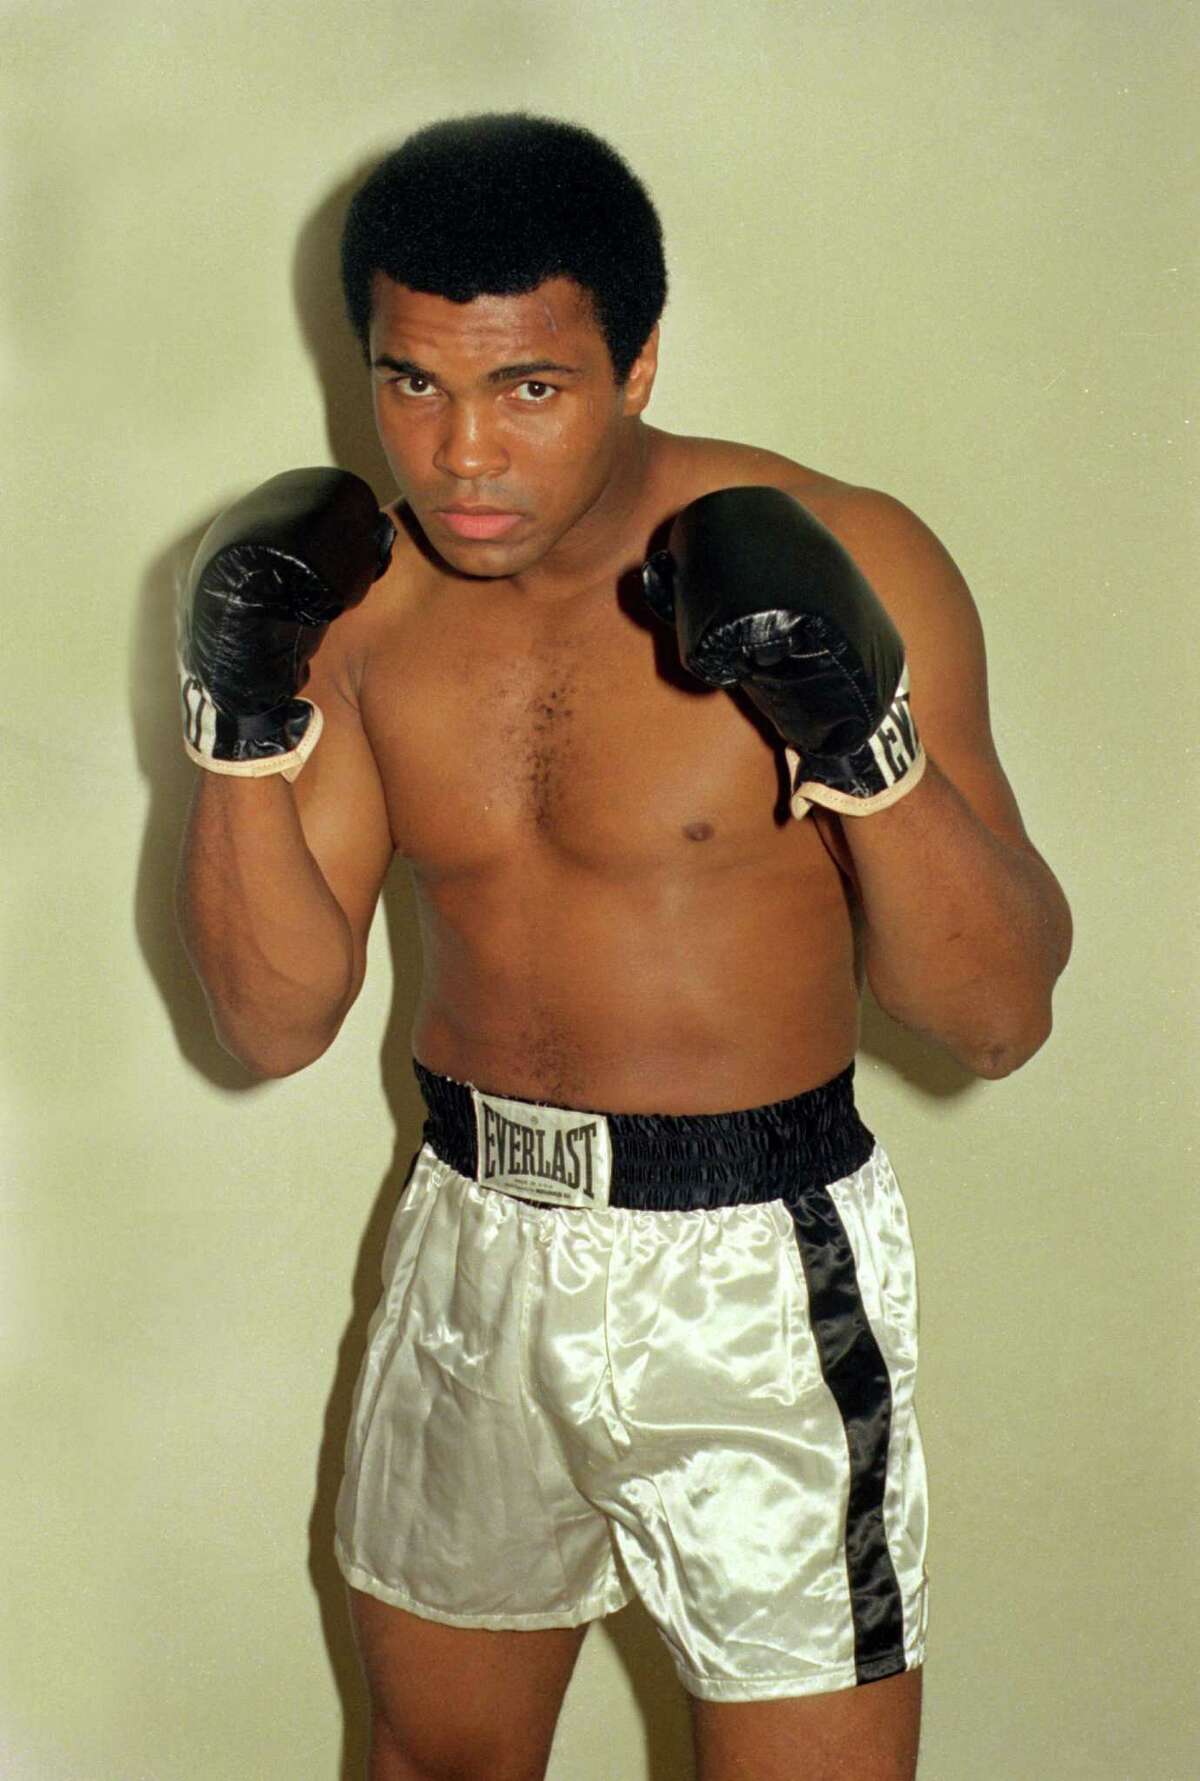 FILE - This is an Oct. 9, 1974, file photo showing Muhammad Ali. Ali, the magnificent heavyweight champion whose fast fists and irrepressible personality transcended sports and captivated the world, has died according to a statement released by his family Friday, June 3, 2016. He was 74.